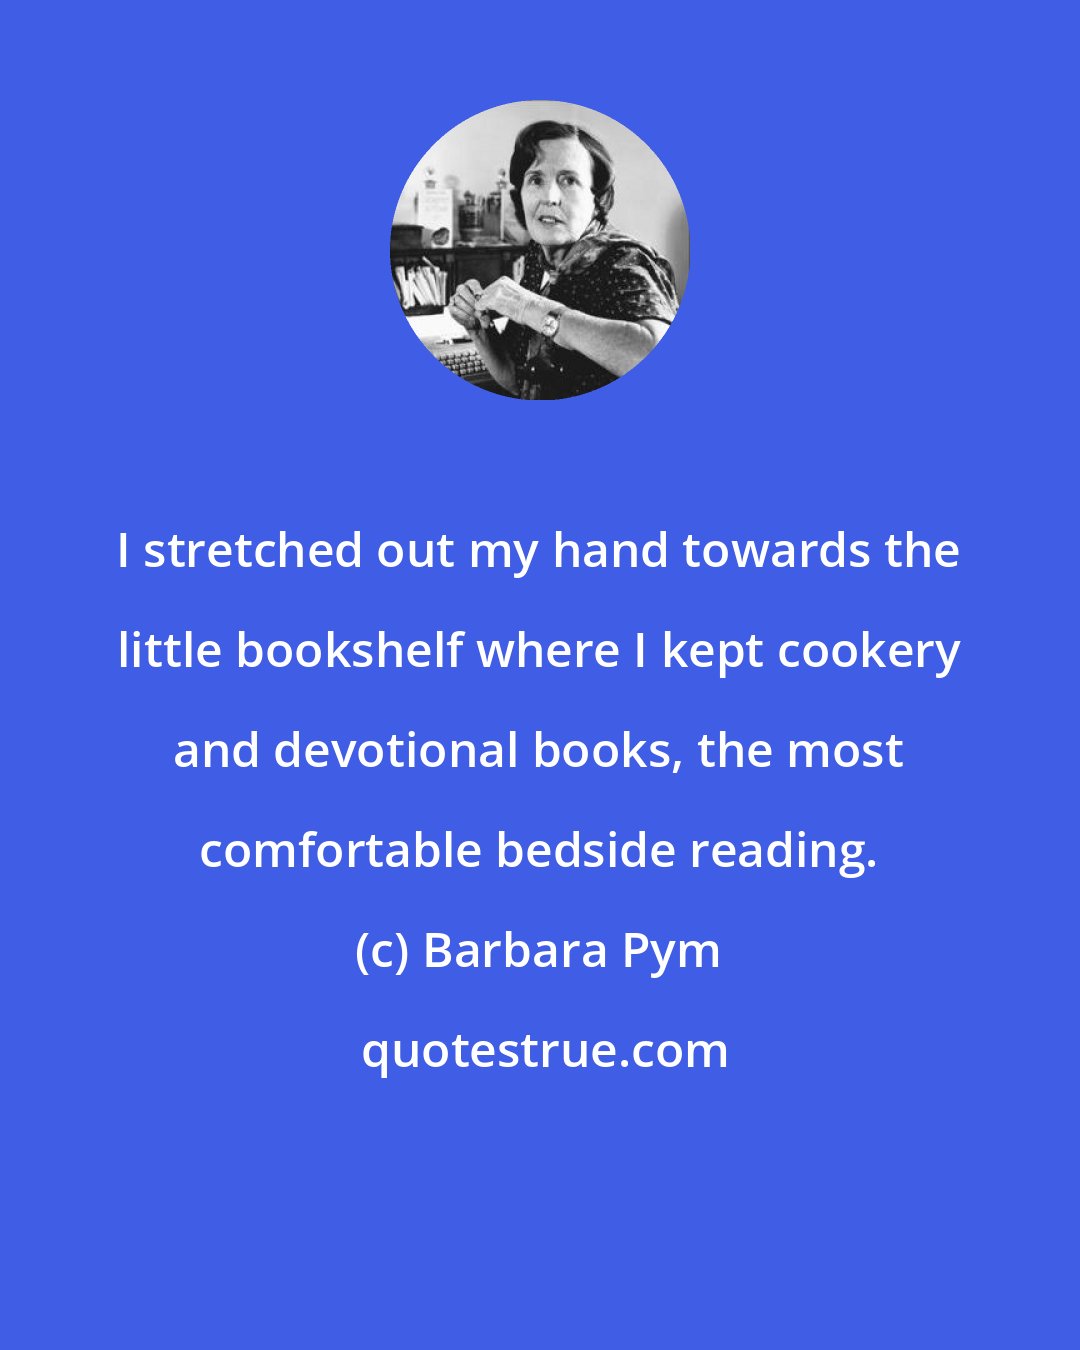 Barbara Pym: I stretched out my hand towards the little bookshelf where I kept cookery and devotional books, the most comfortable bedside reading.